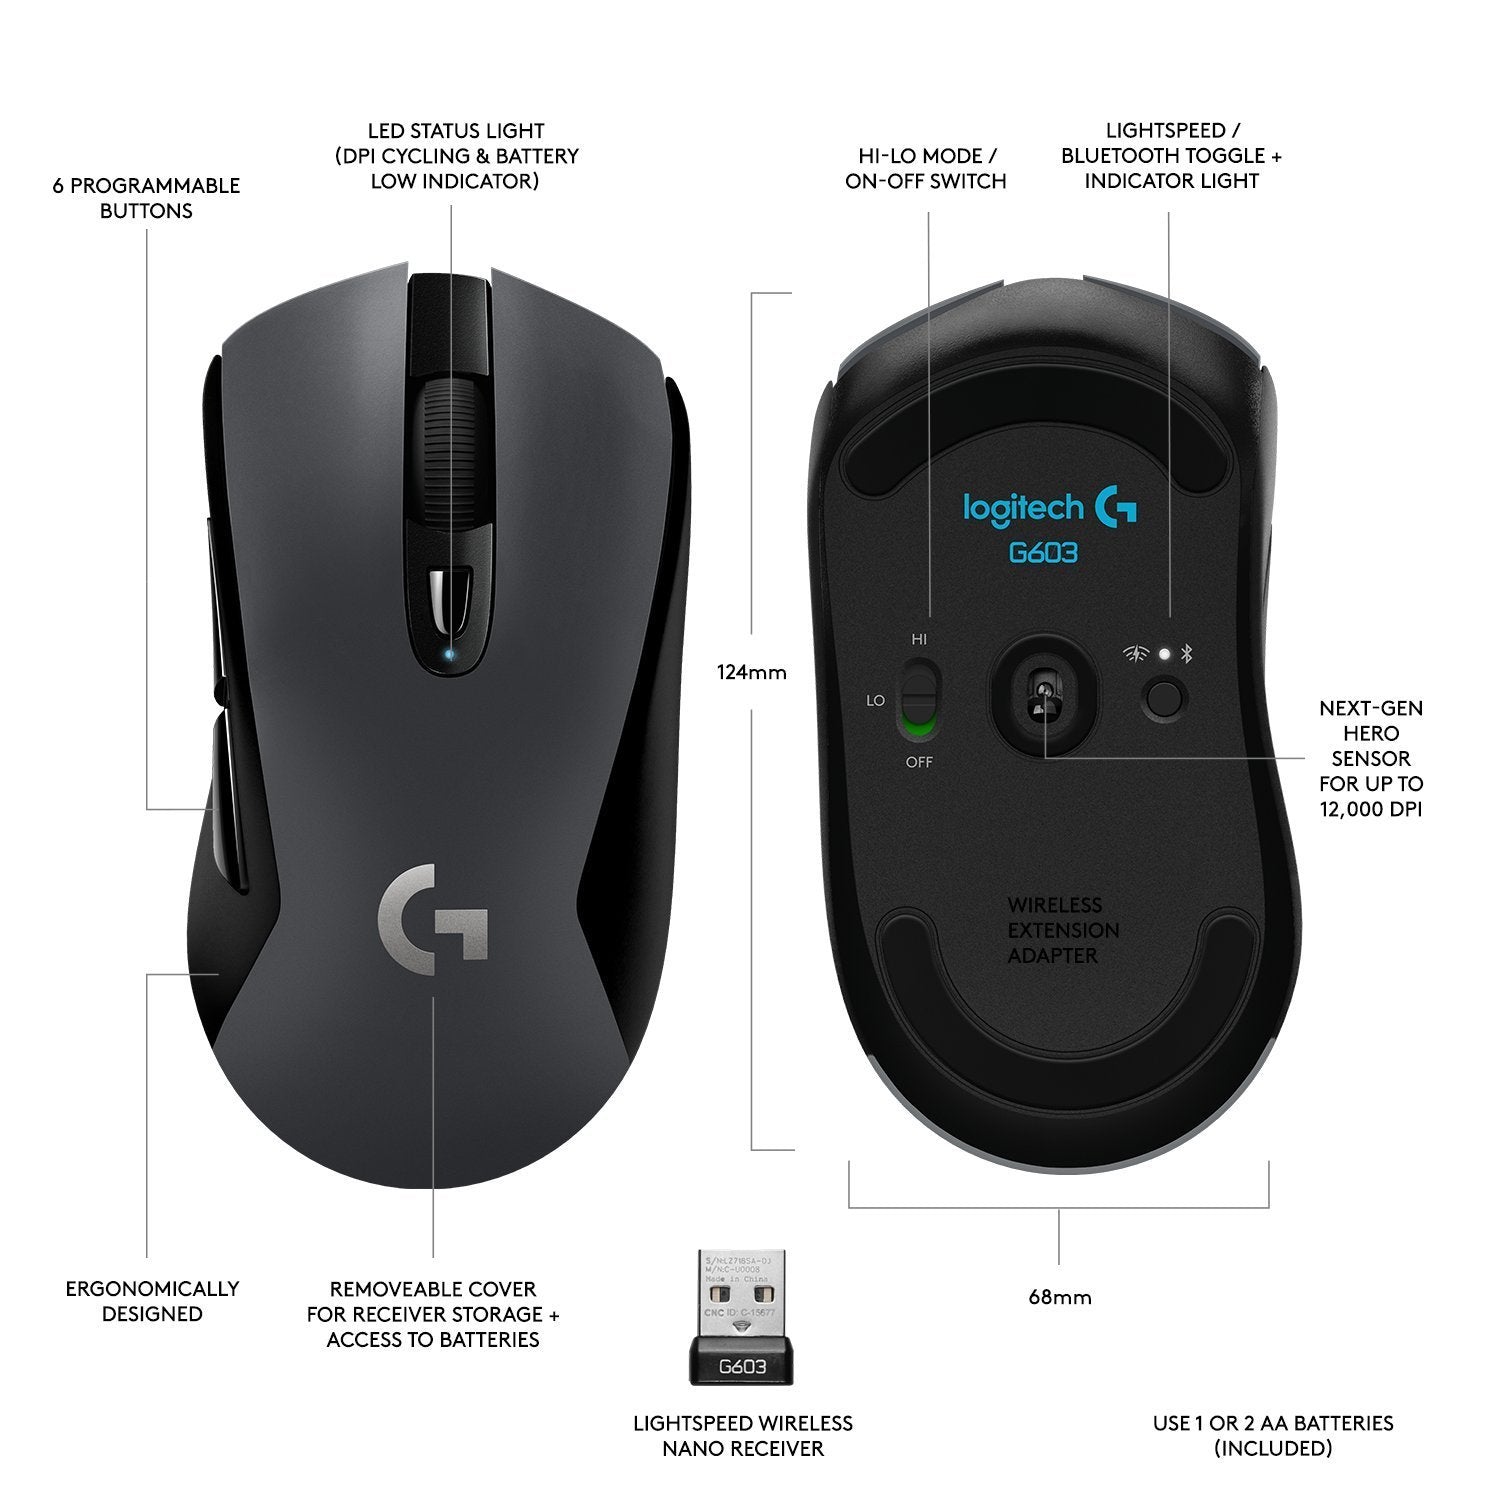 910-005103: Logitech G603 gaming mouse